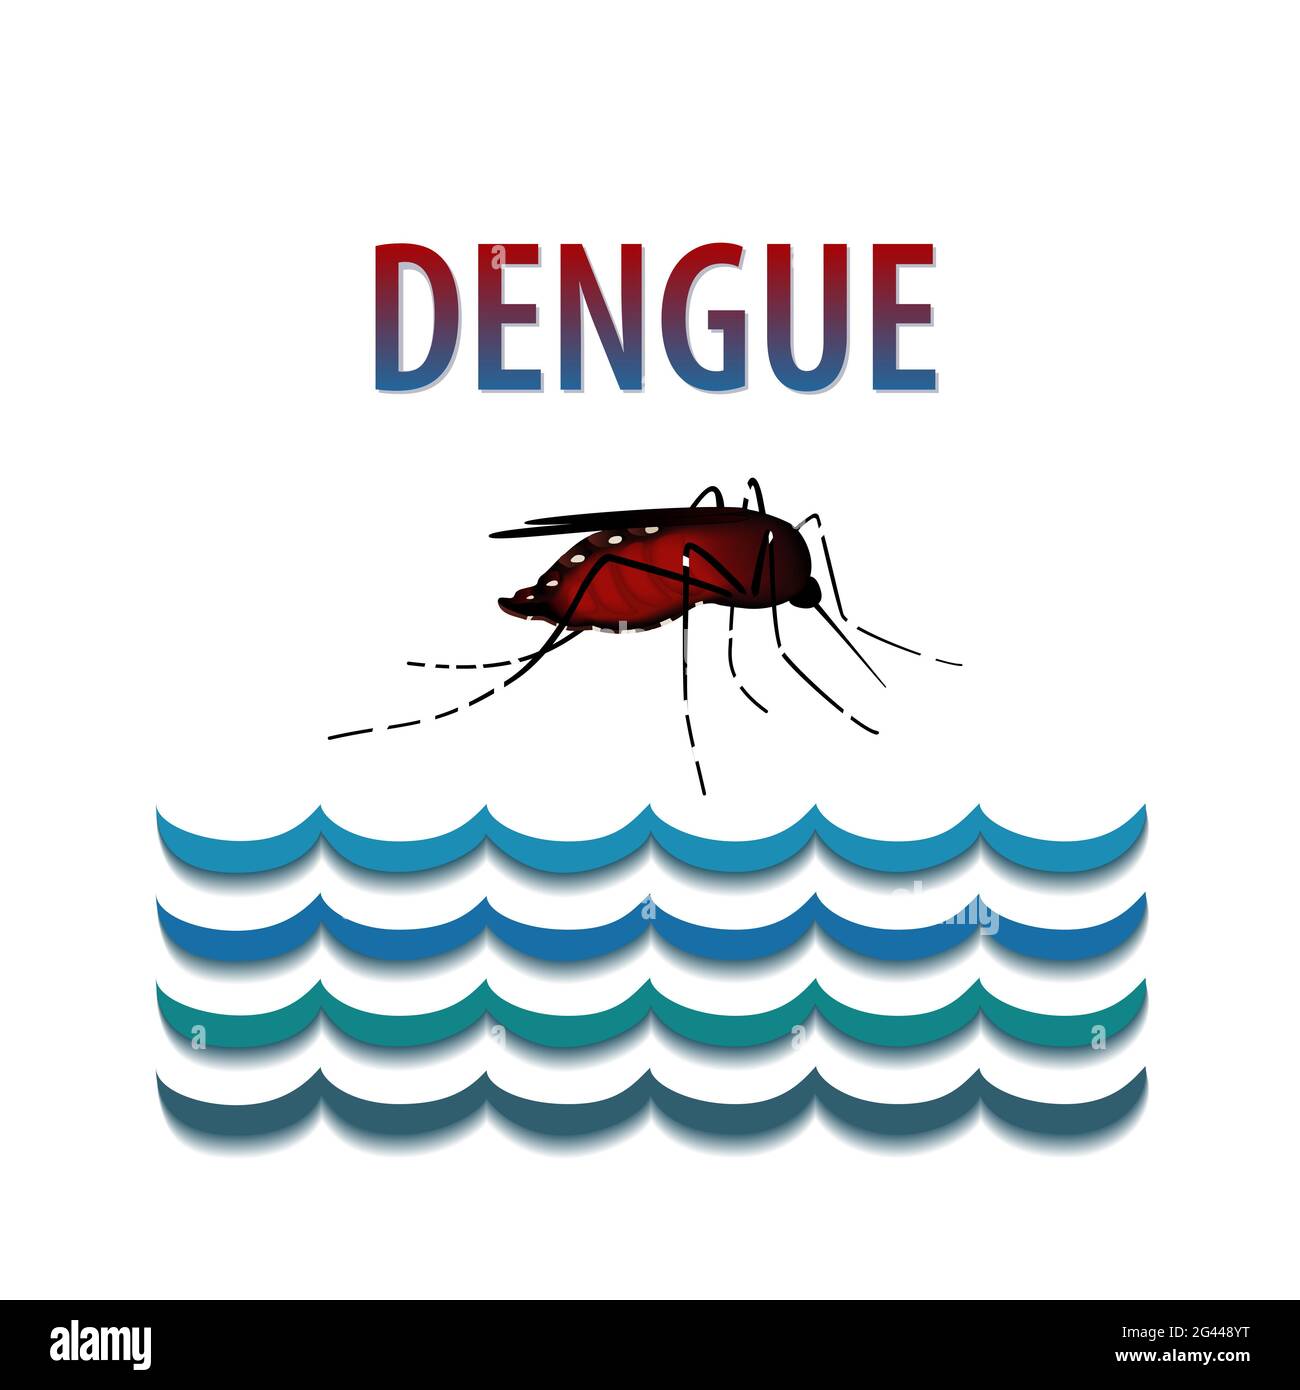 Dengue Fever, mosquito, blood filled biting insect, standing water, public health risk, infectious disease vector isolated on white background Stock Photo